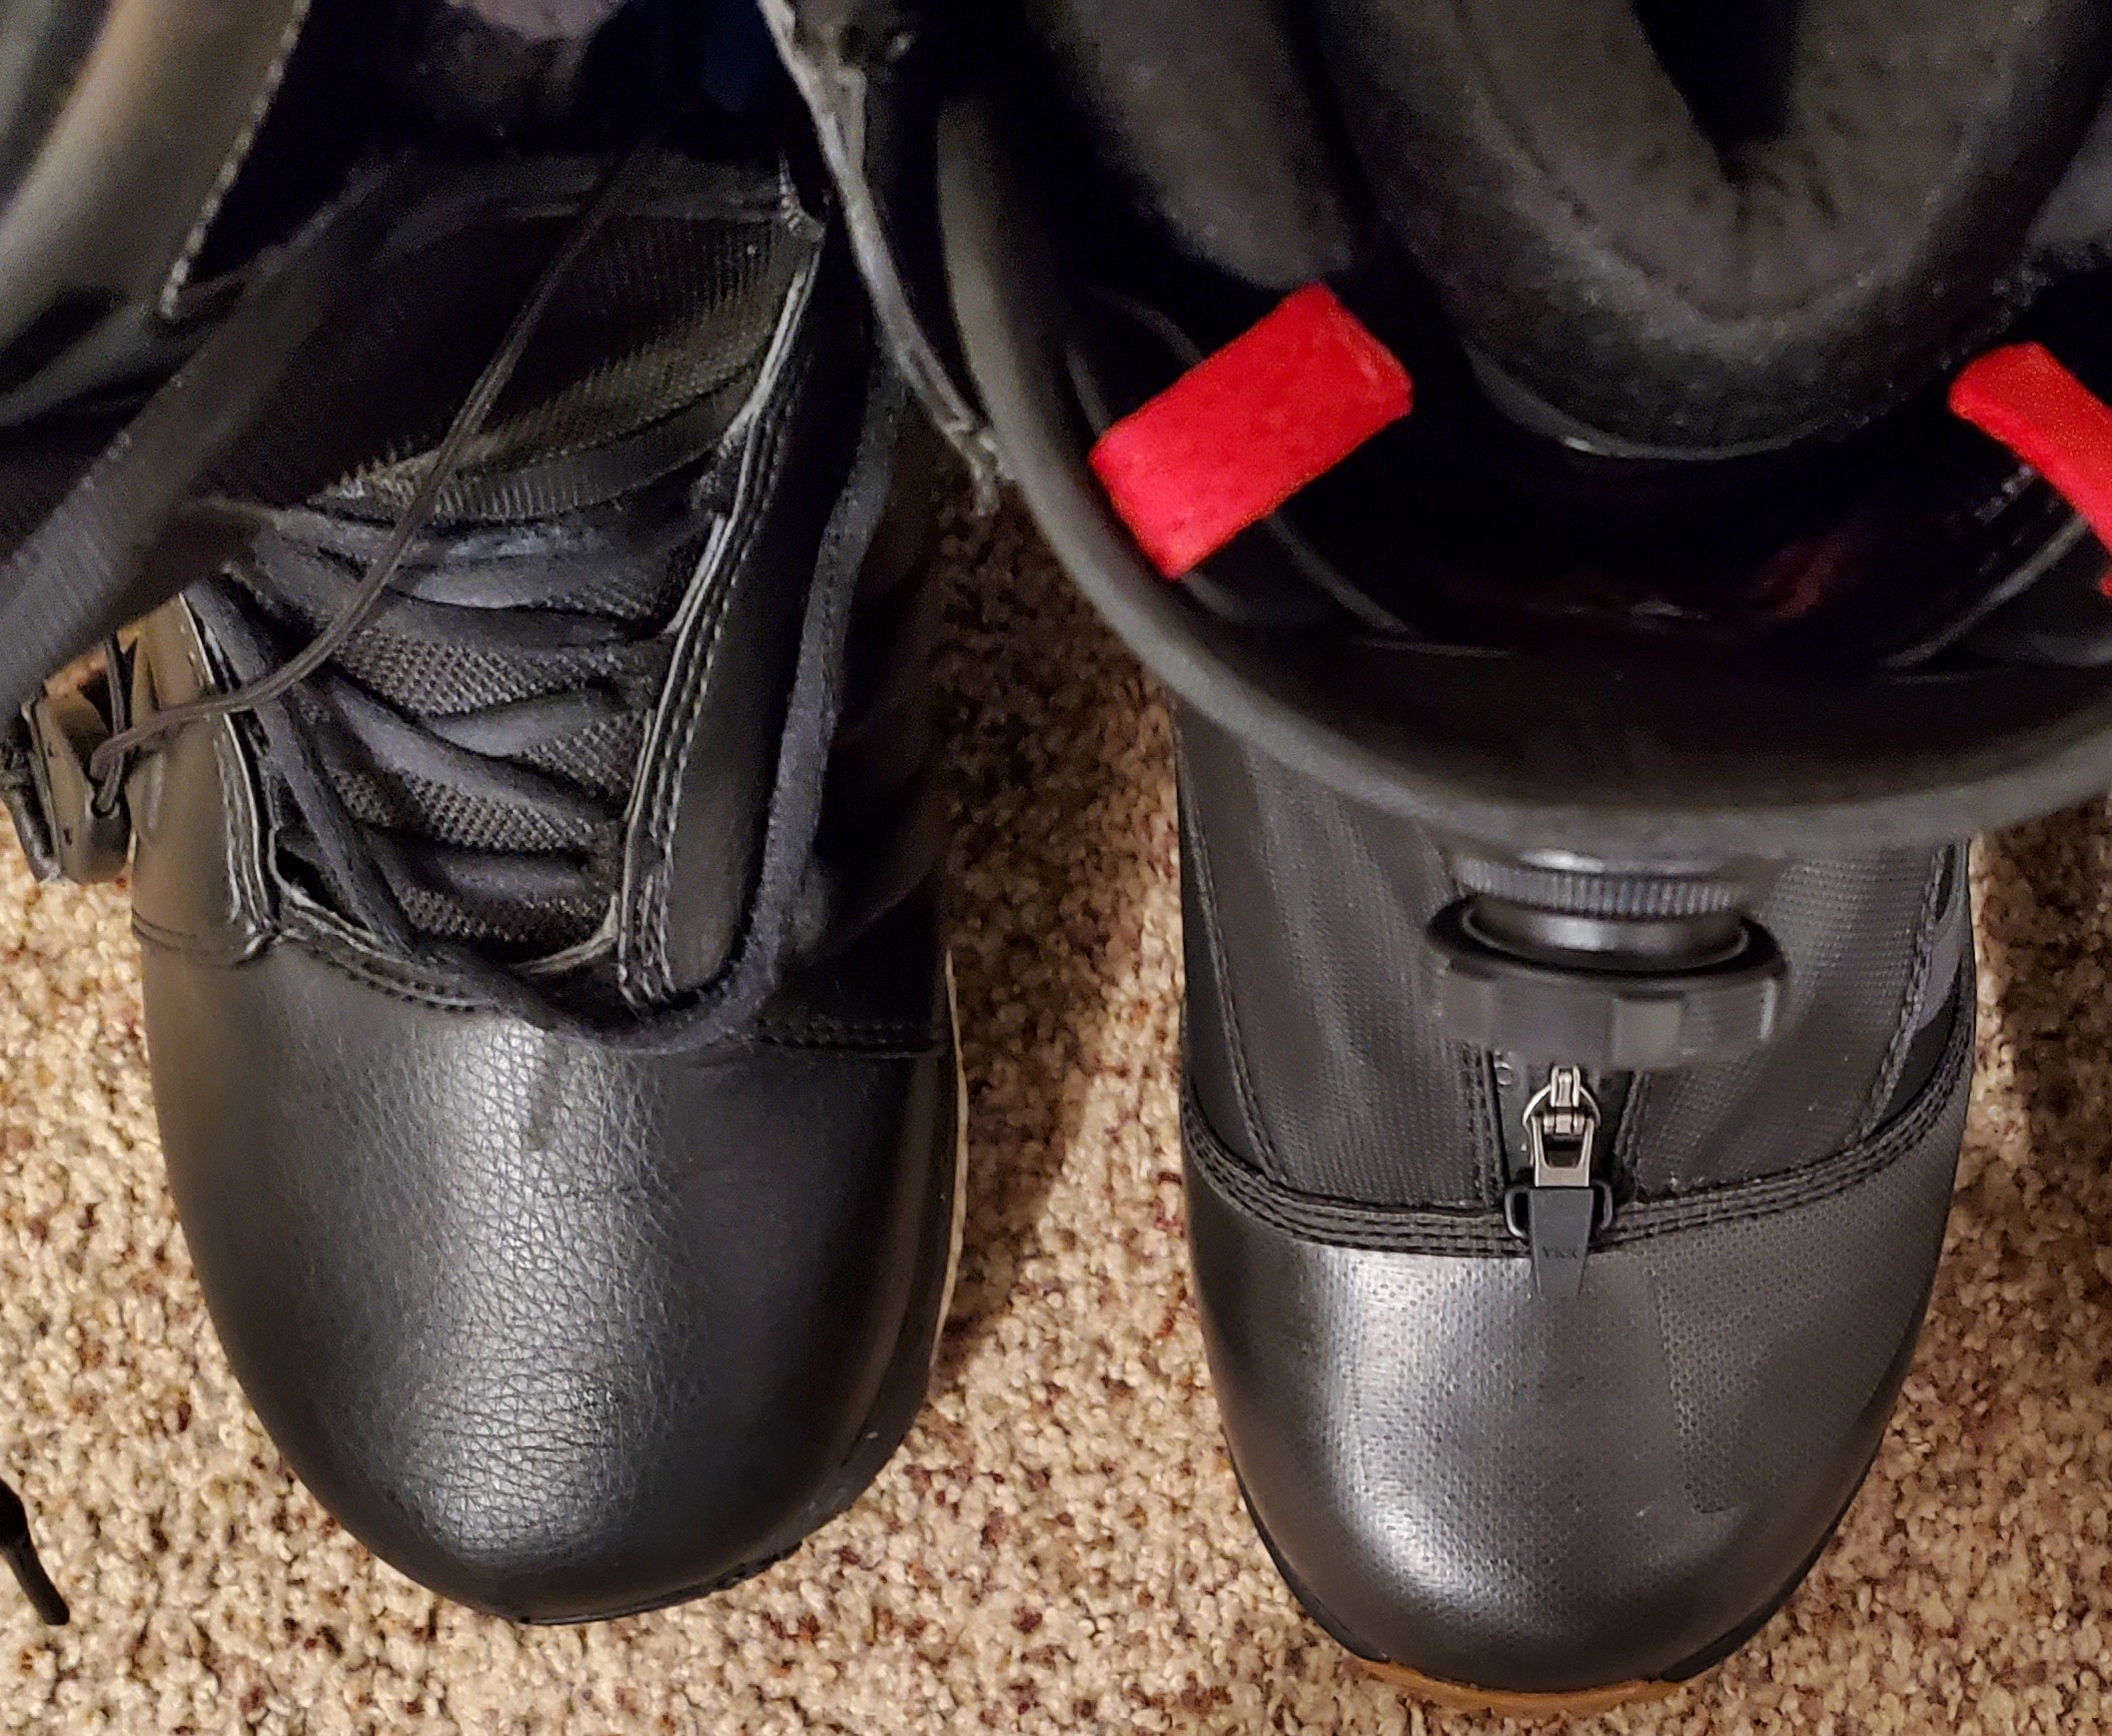 Vans Verse 2020 Snowboard Boot Review - The Good Ride